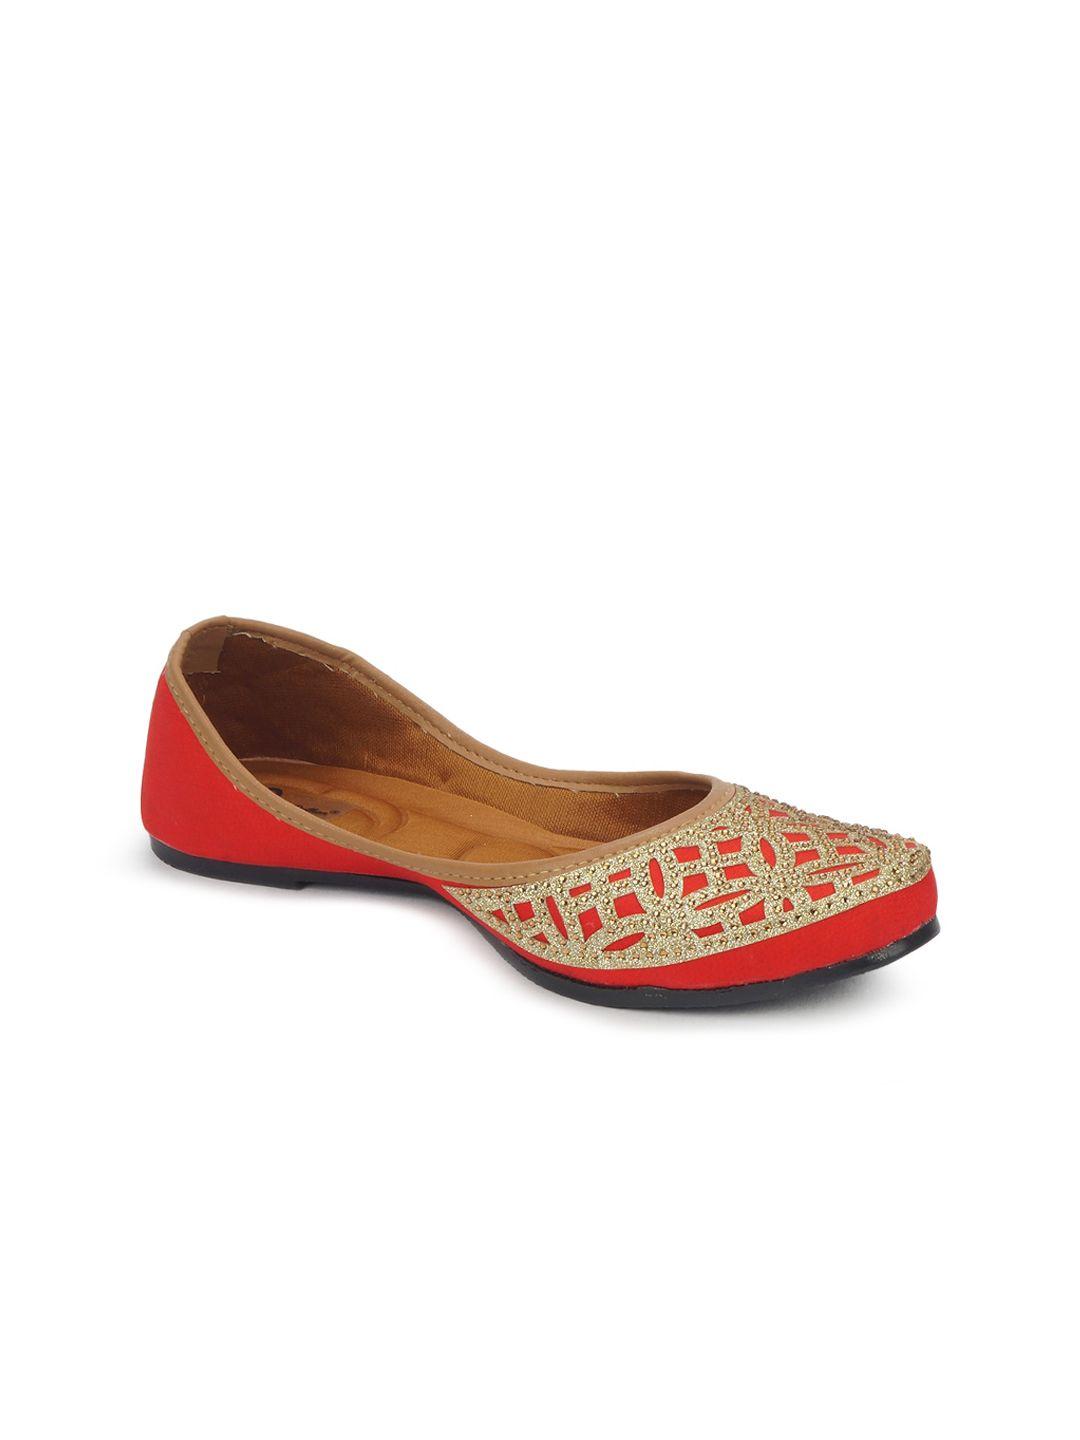 the desi dulhan women red embellished leather party ballerinas flats